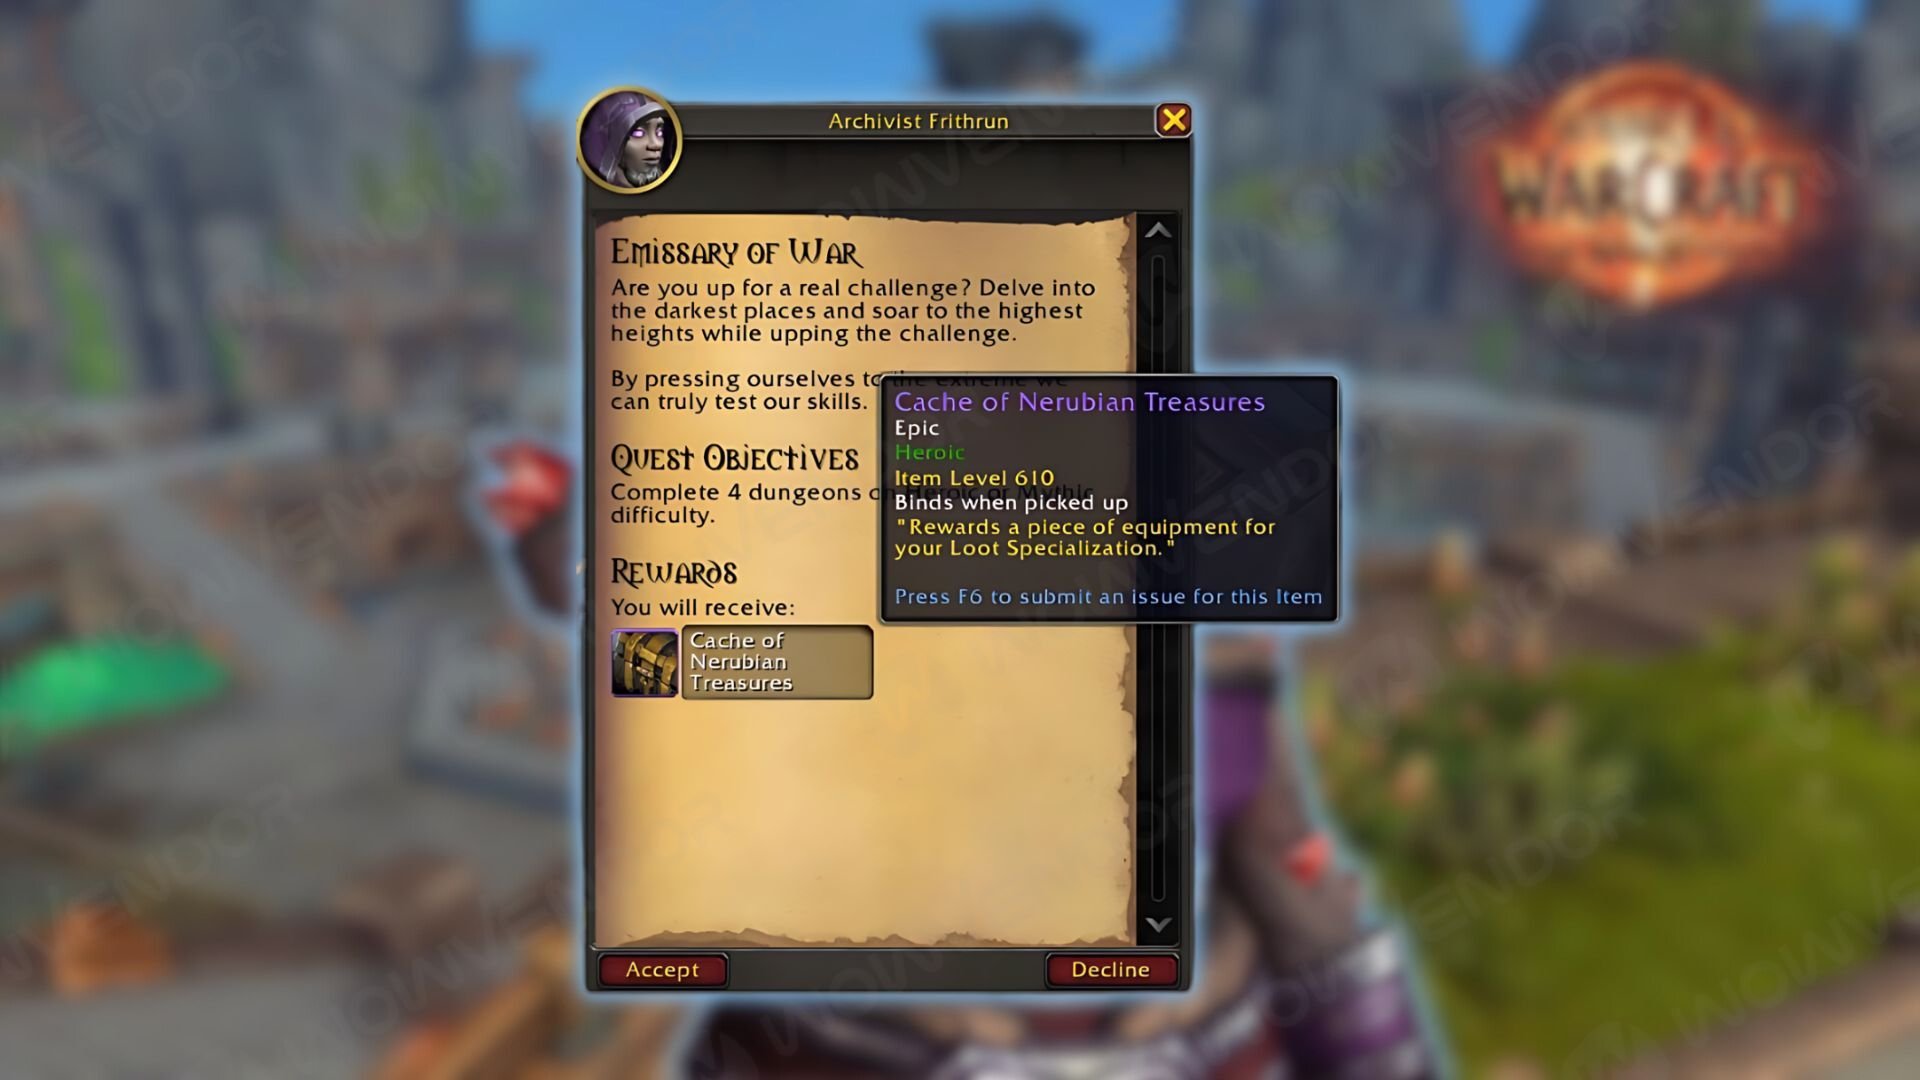 Emissary of War quest in The War Within: Archivist Frithrun